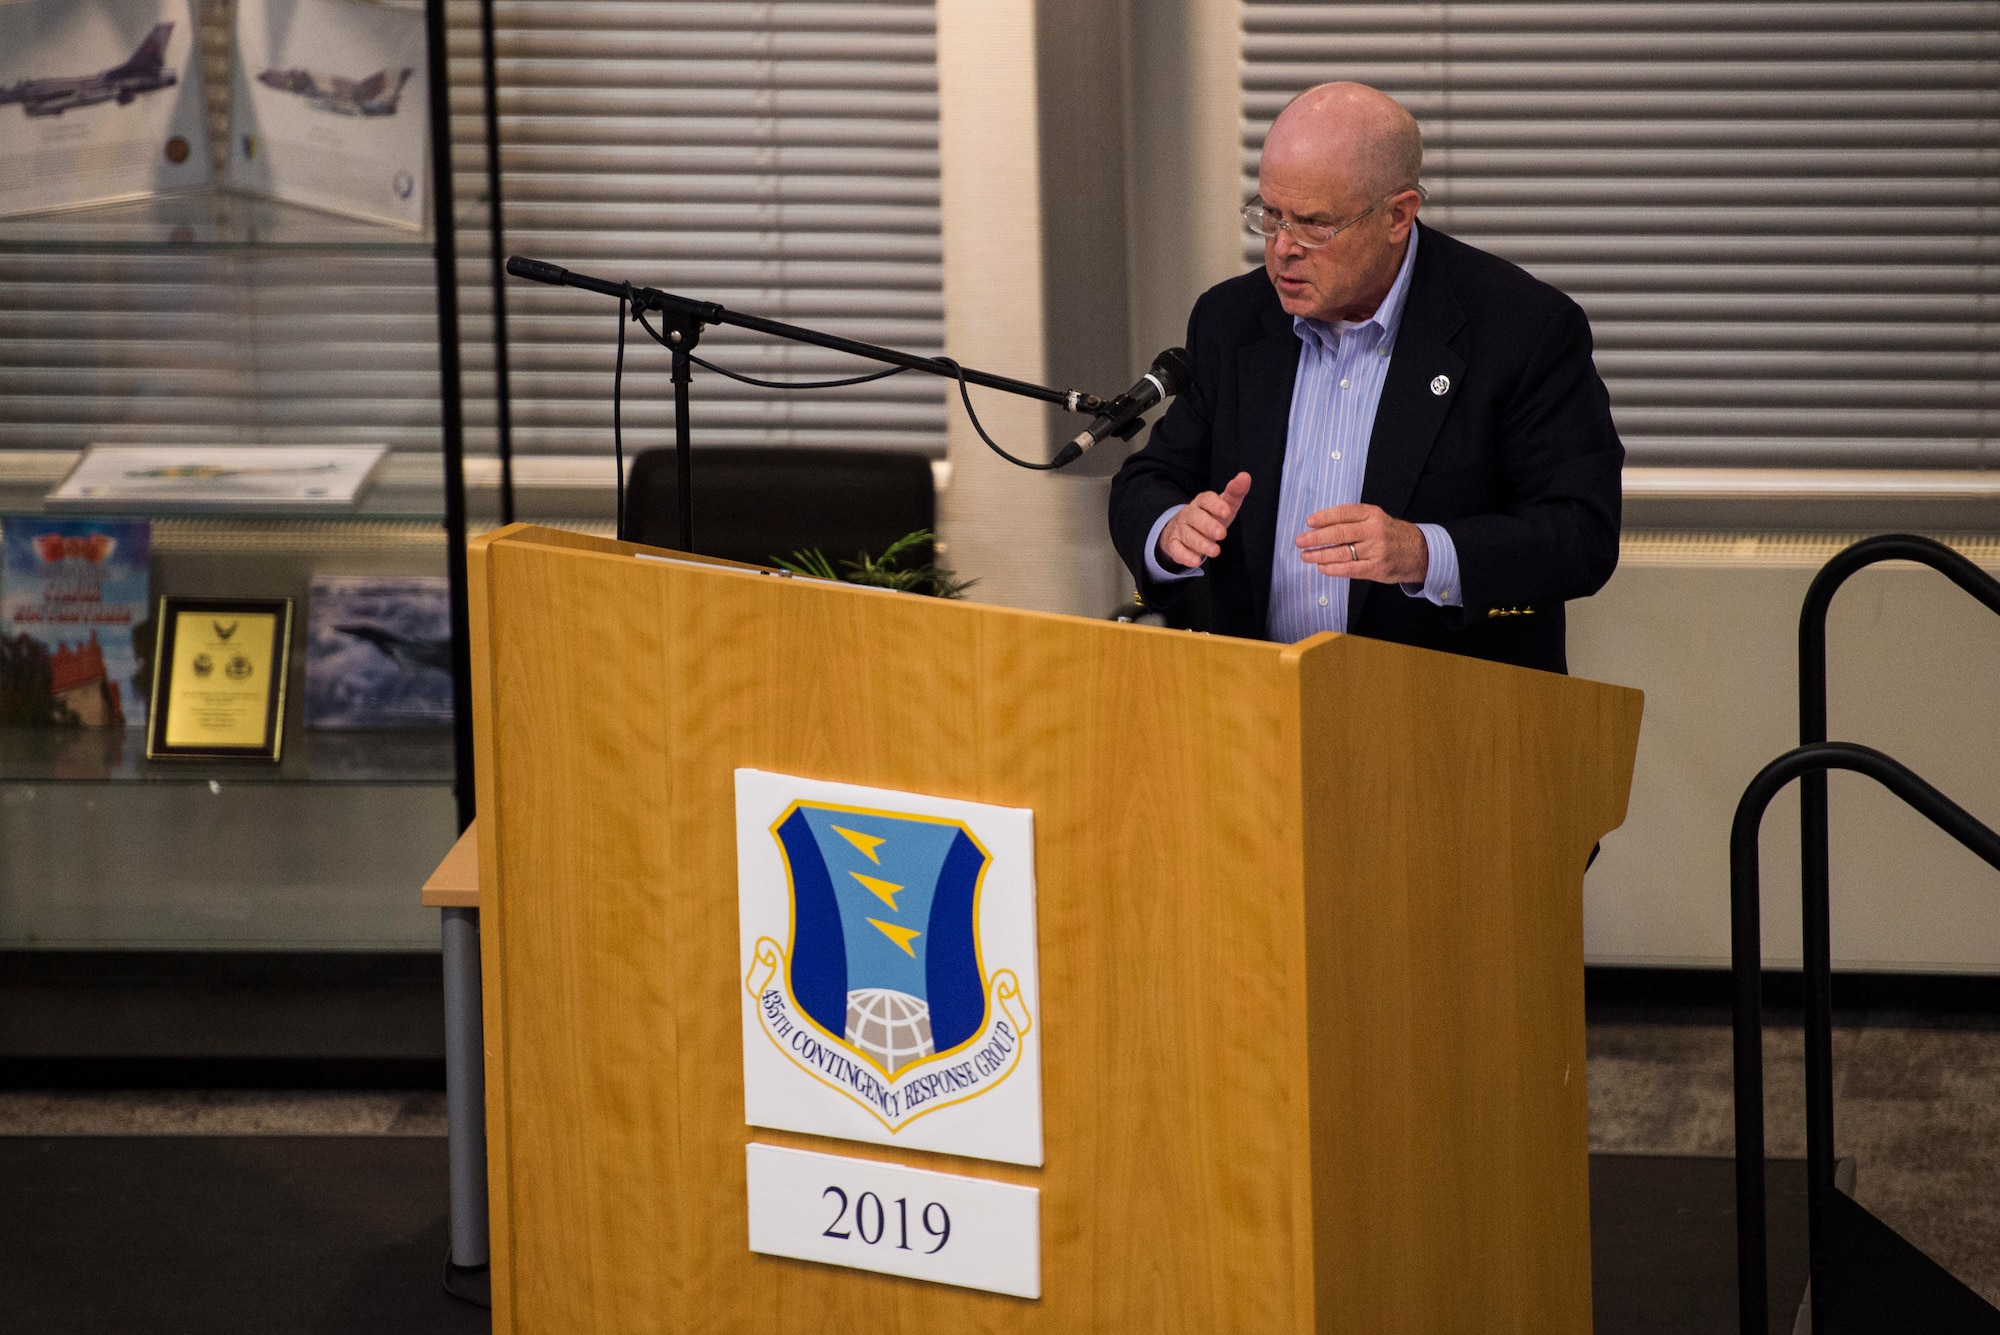 The 435th Contingency Response Group hosted a 20th anniversary training symposium for the Air Force’s contingency response mission.